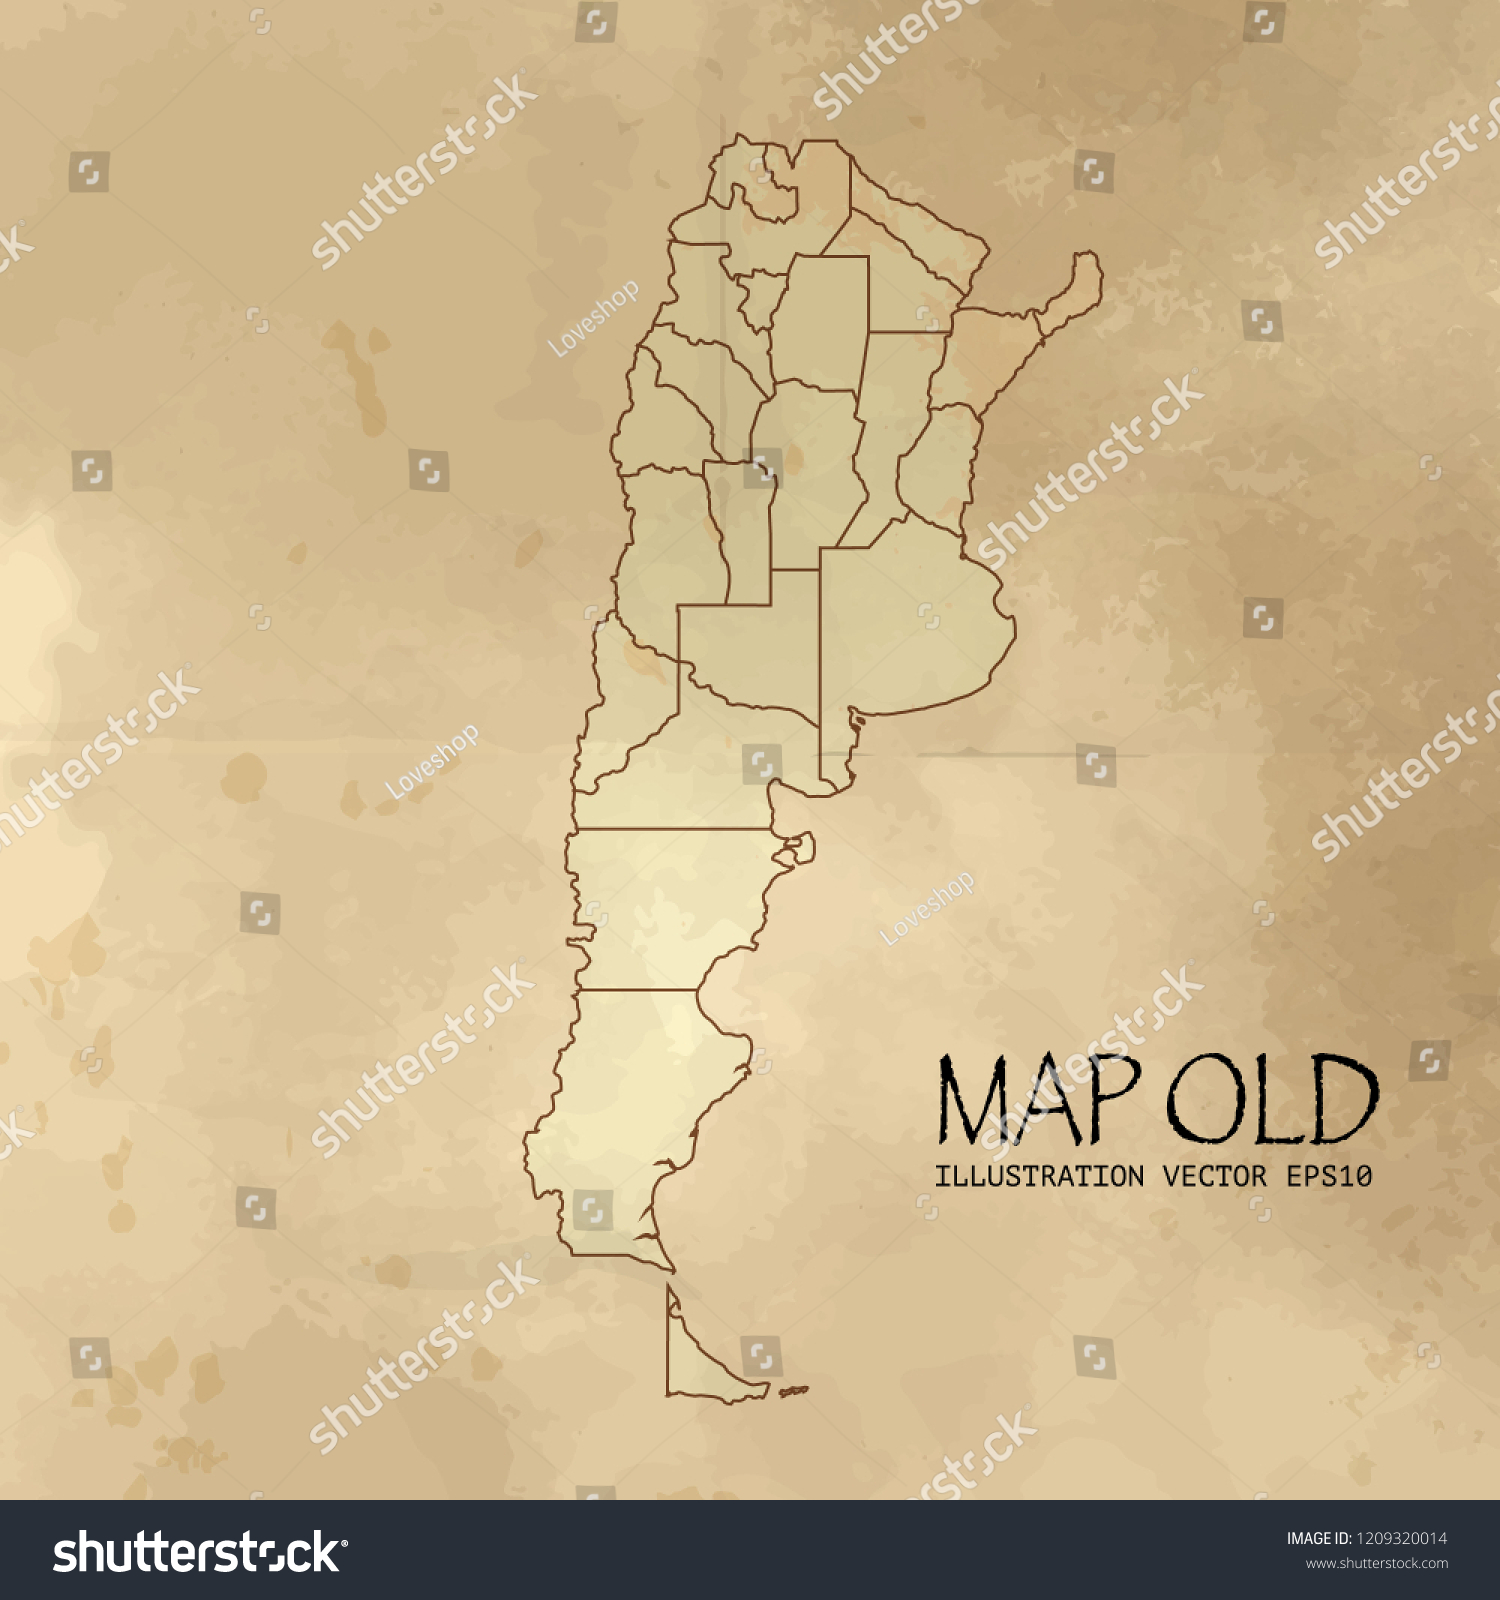 Argentina On Map Balkans Soft Grunge Stock Vector Royalty Free